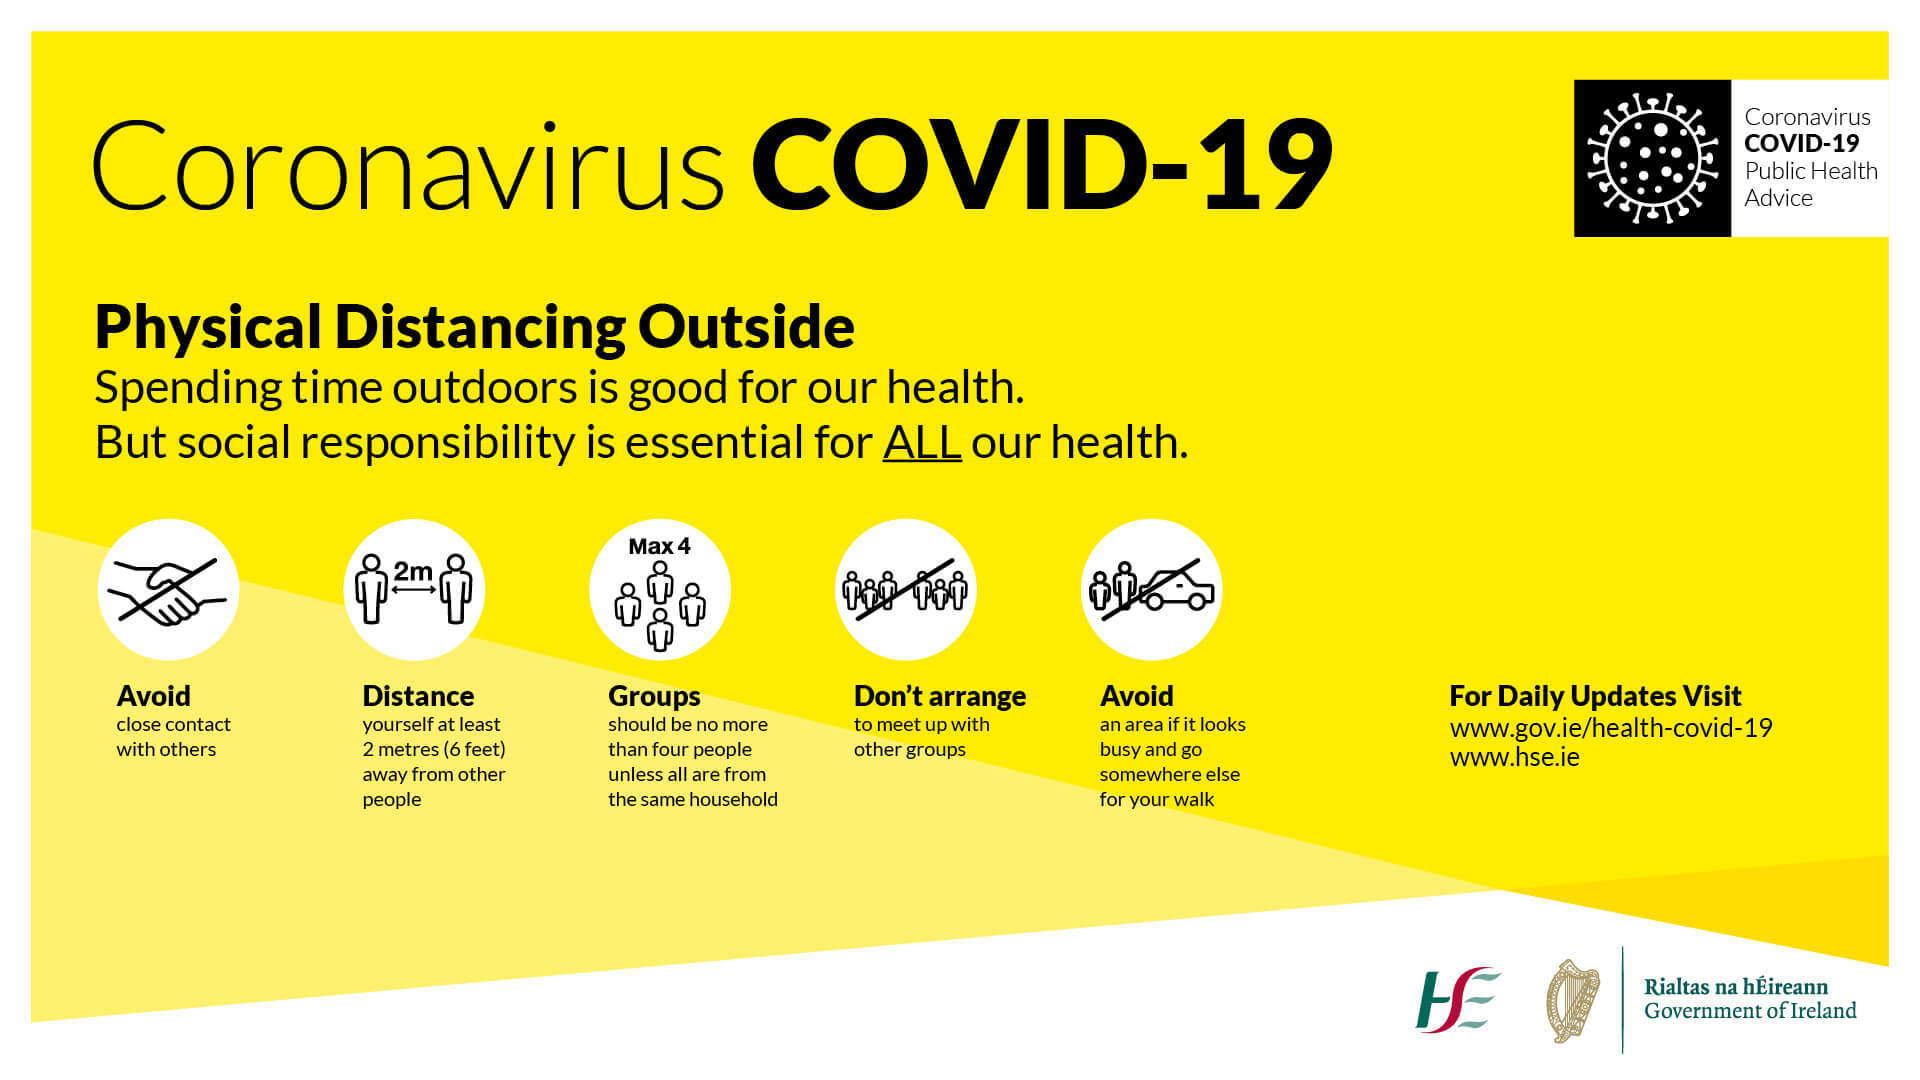 COVID-19 Physical Distancing